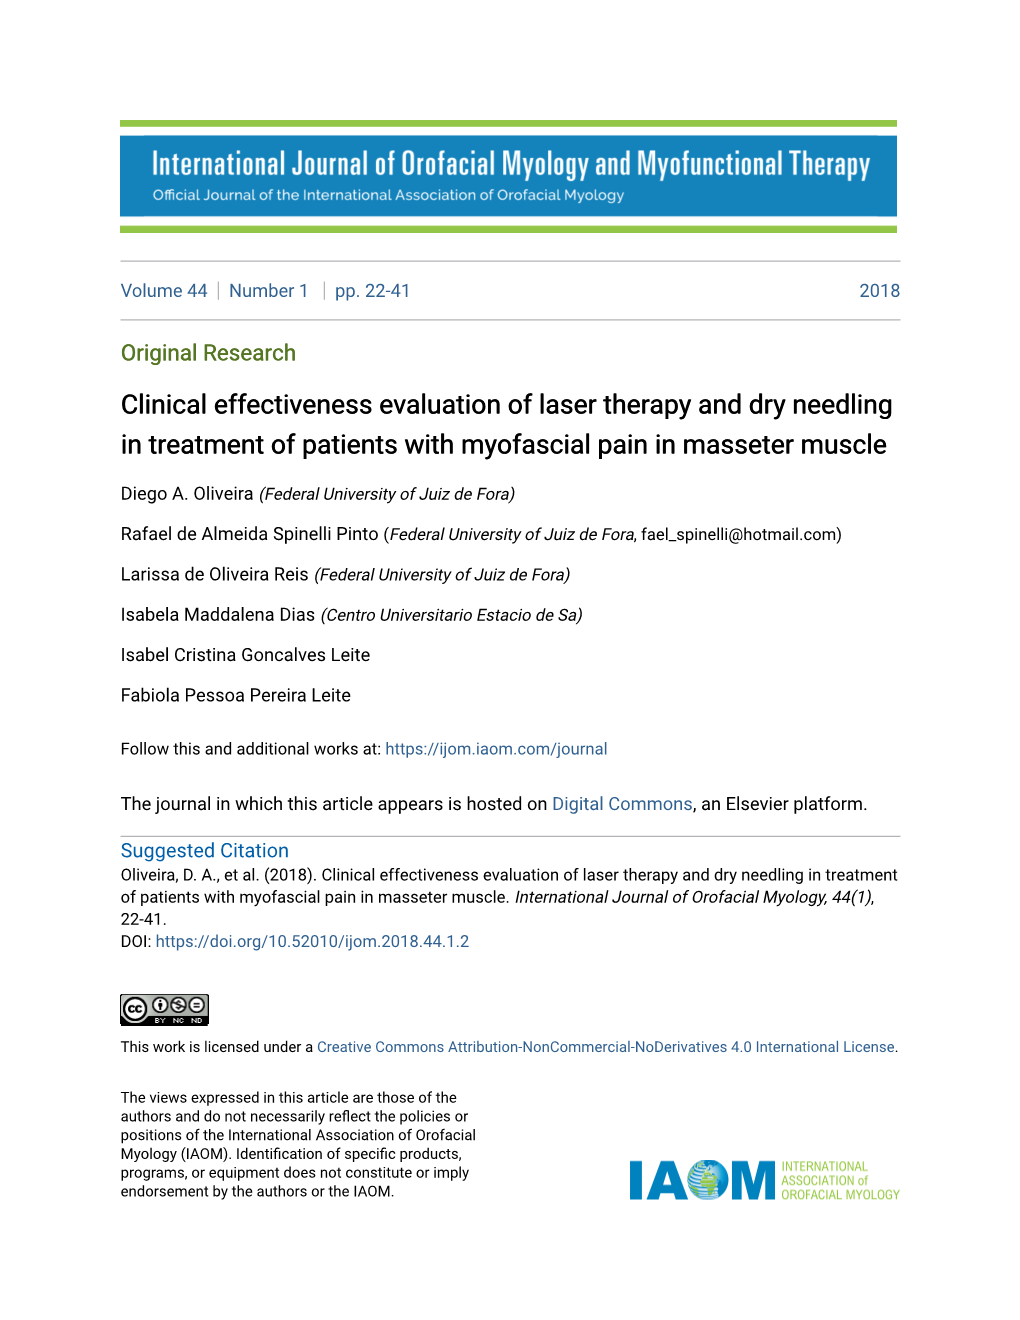 Clinical Effectiveness Evaluation of Laser Therapy and Dry Needling in Treatment of Patients with Myofascial Pain in Masseter Muscle